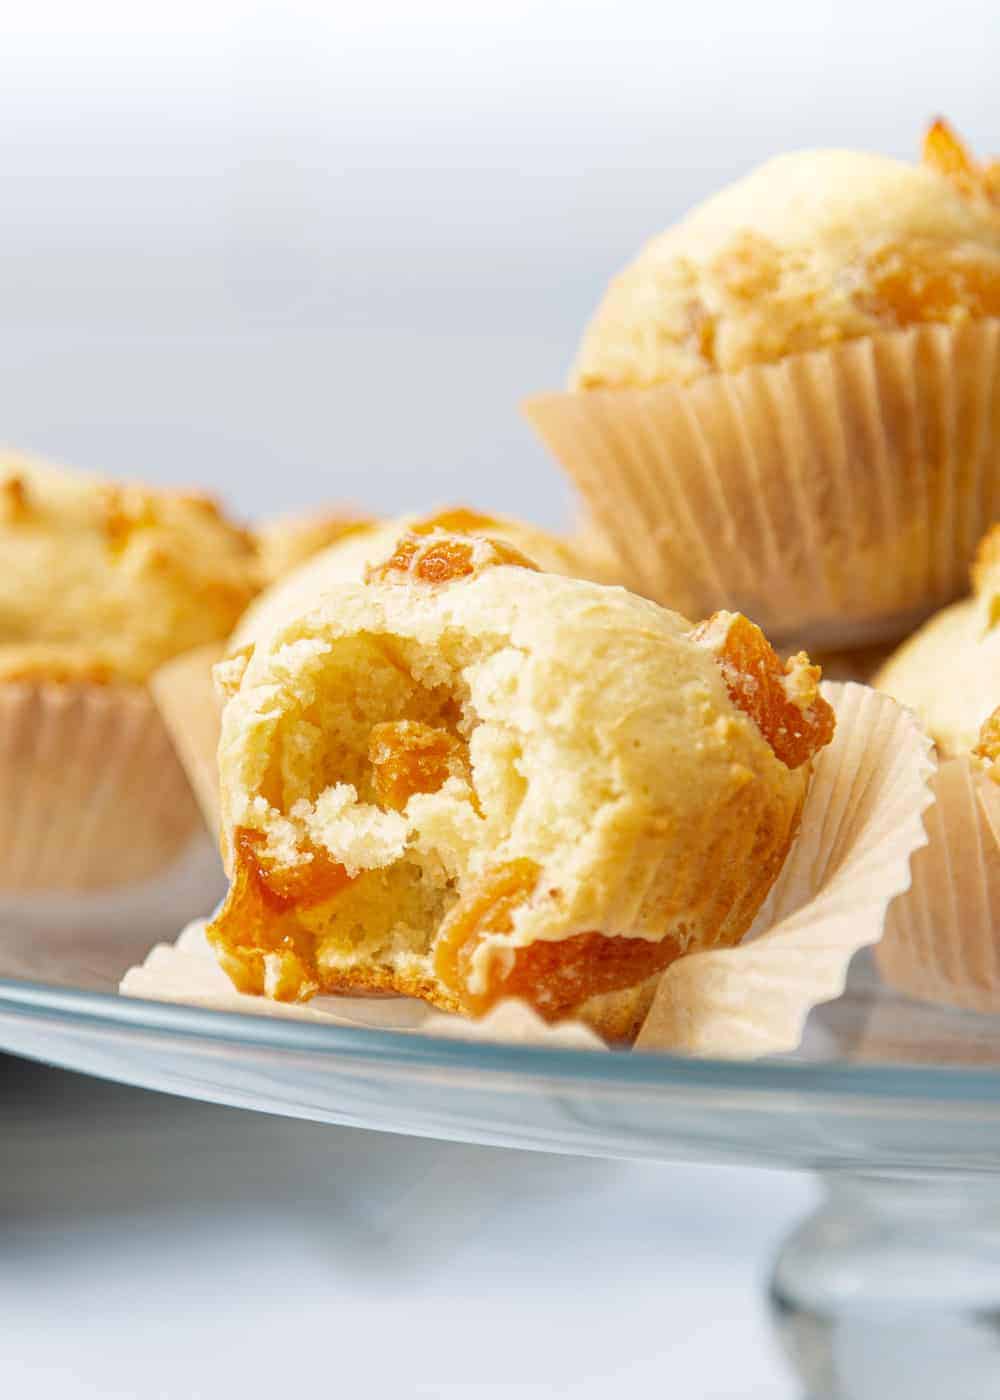 Apricot muffin with a bite taken out.